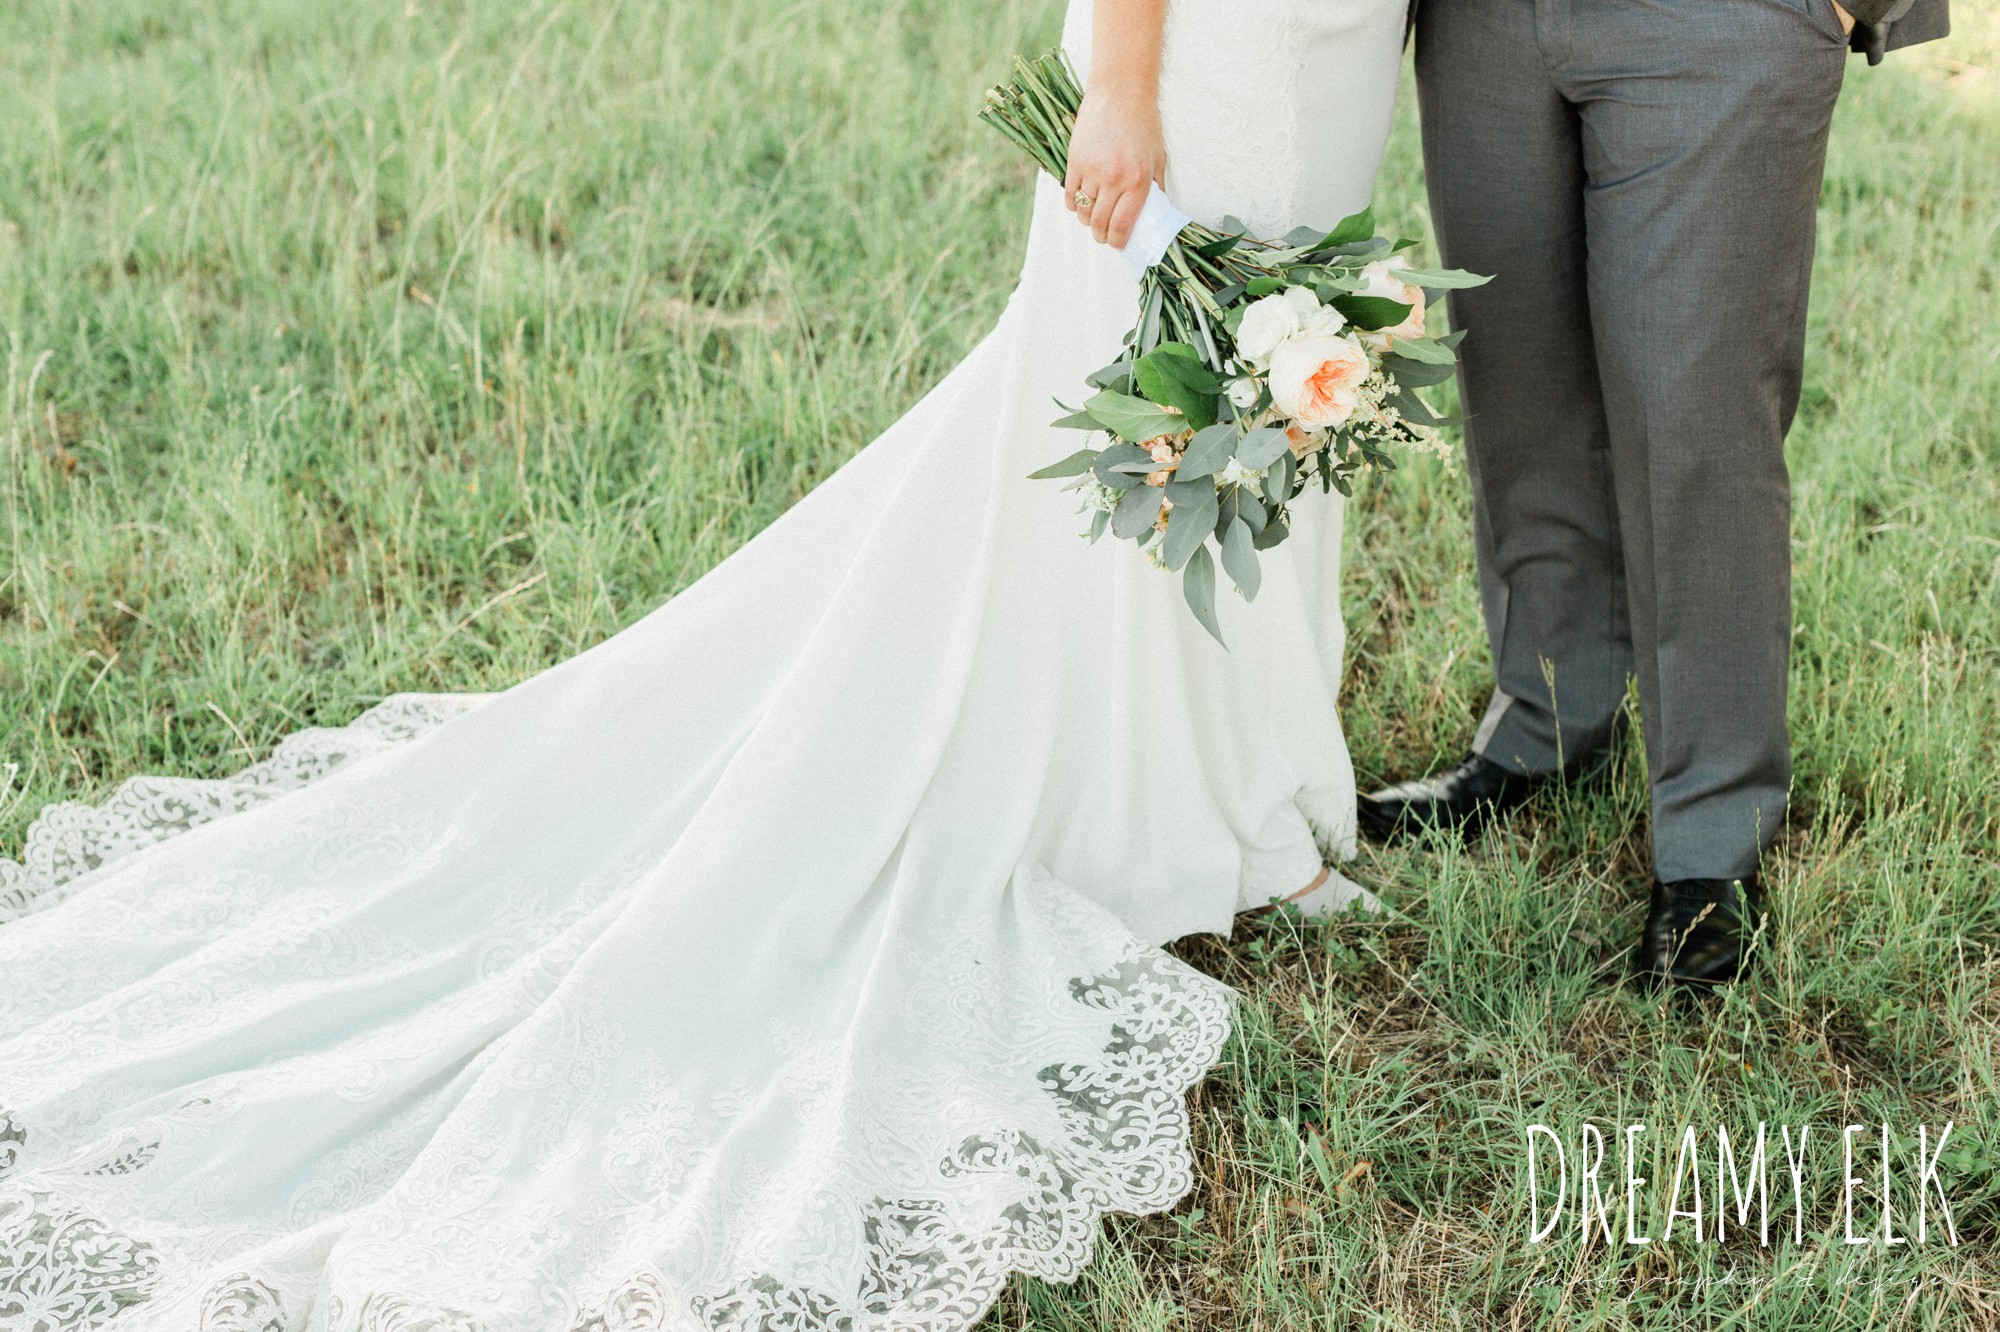 bride and groom, gray suit navy tie, essense of australia column dress, unforgettable floral, spring wedding photo college station texas, dreamy elk photography and design